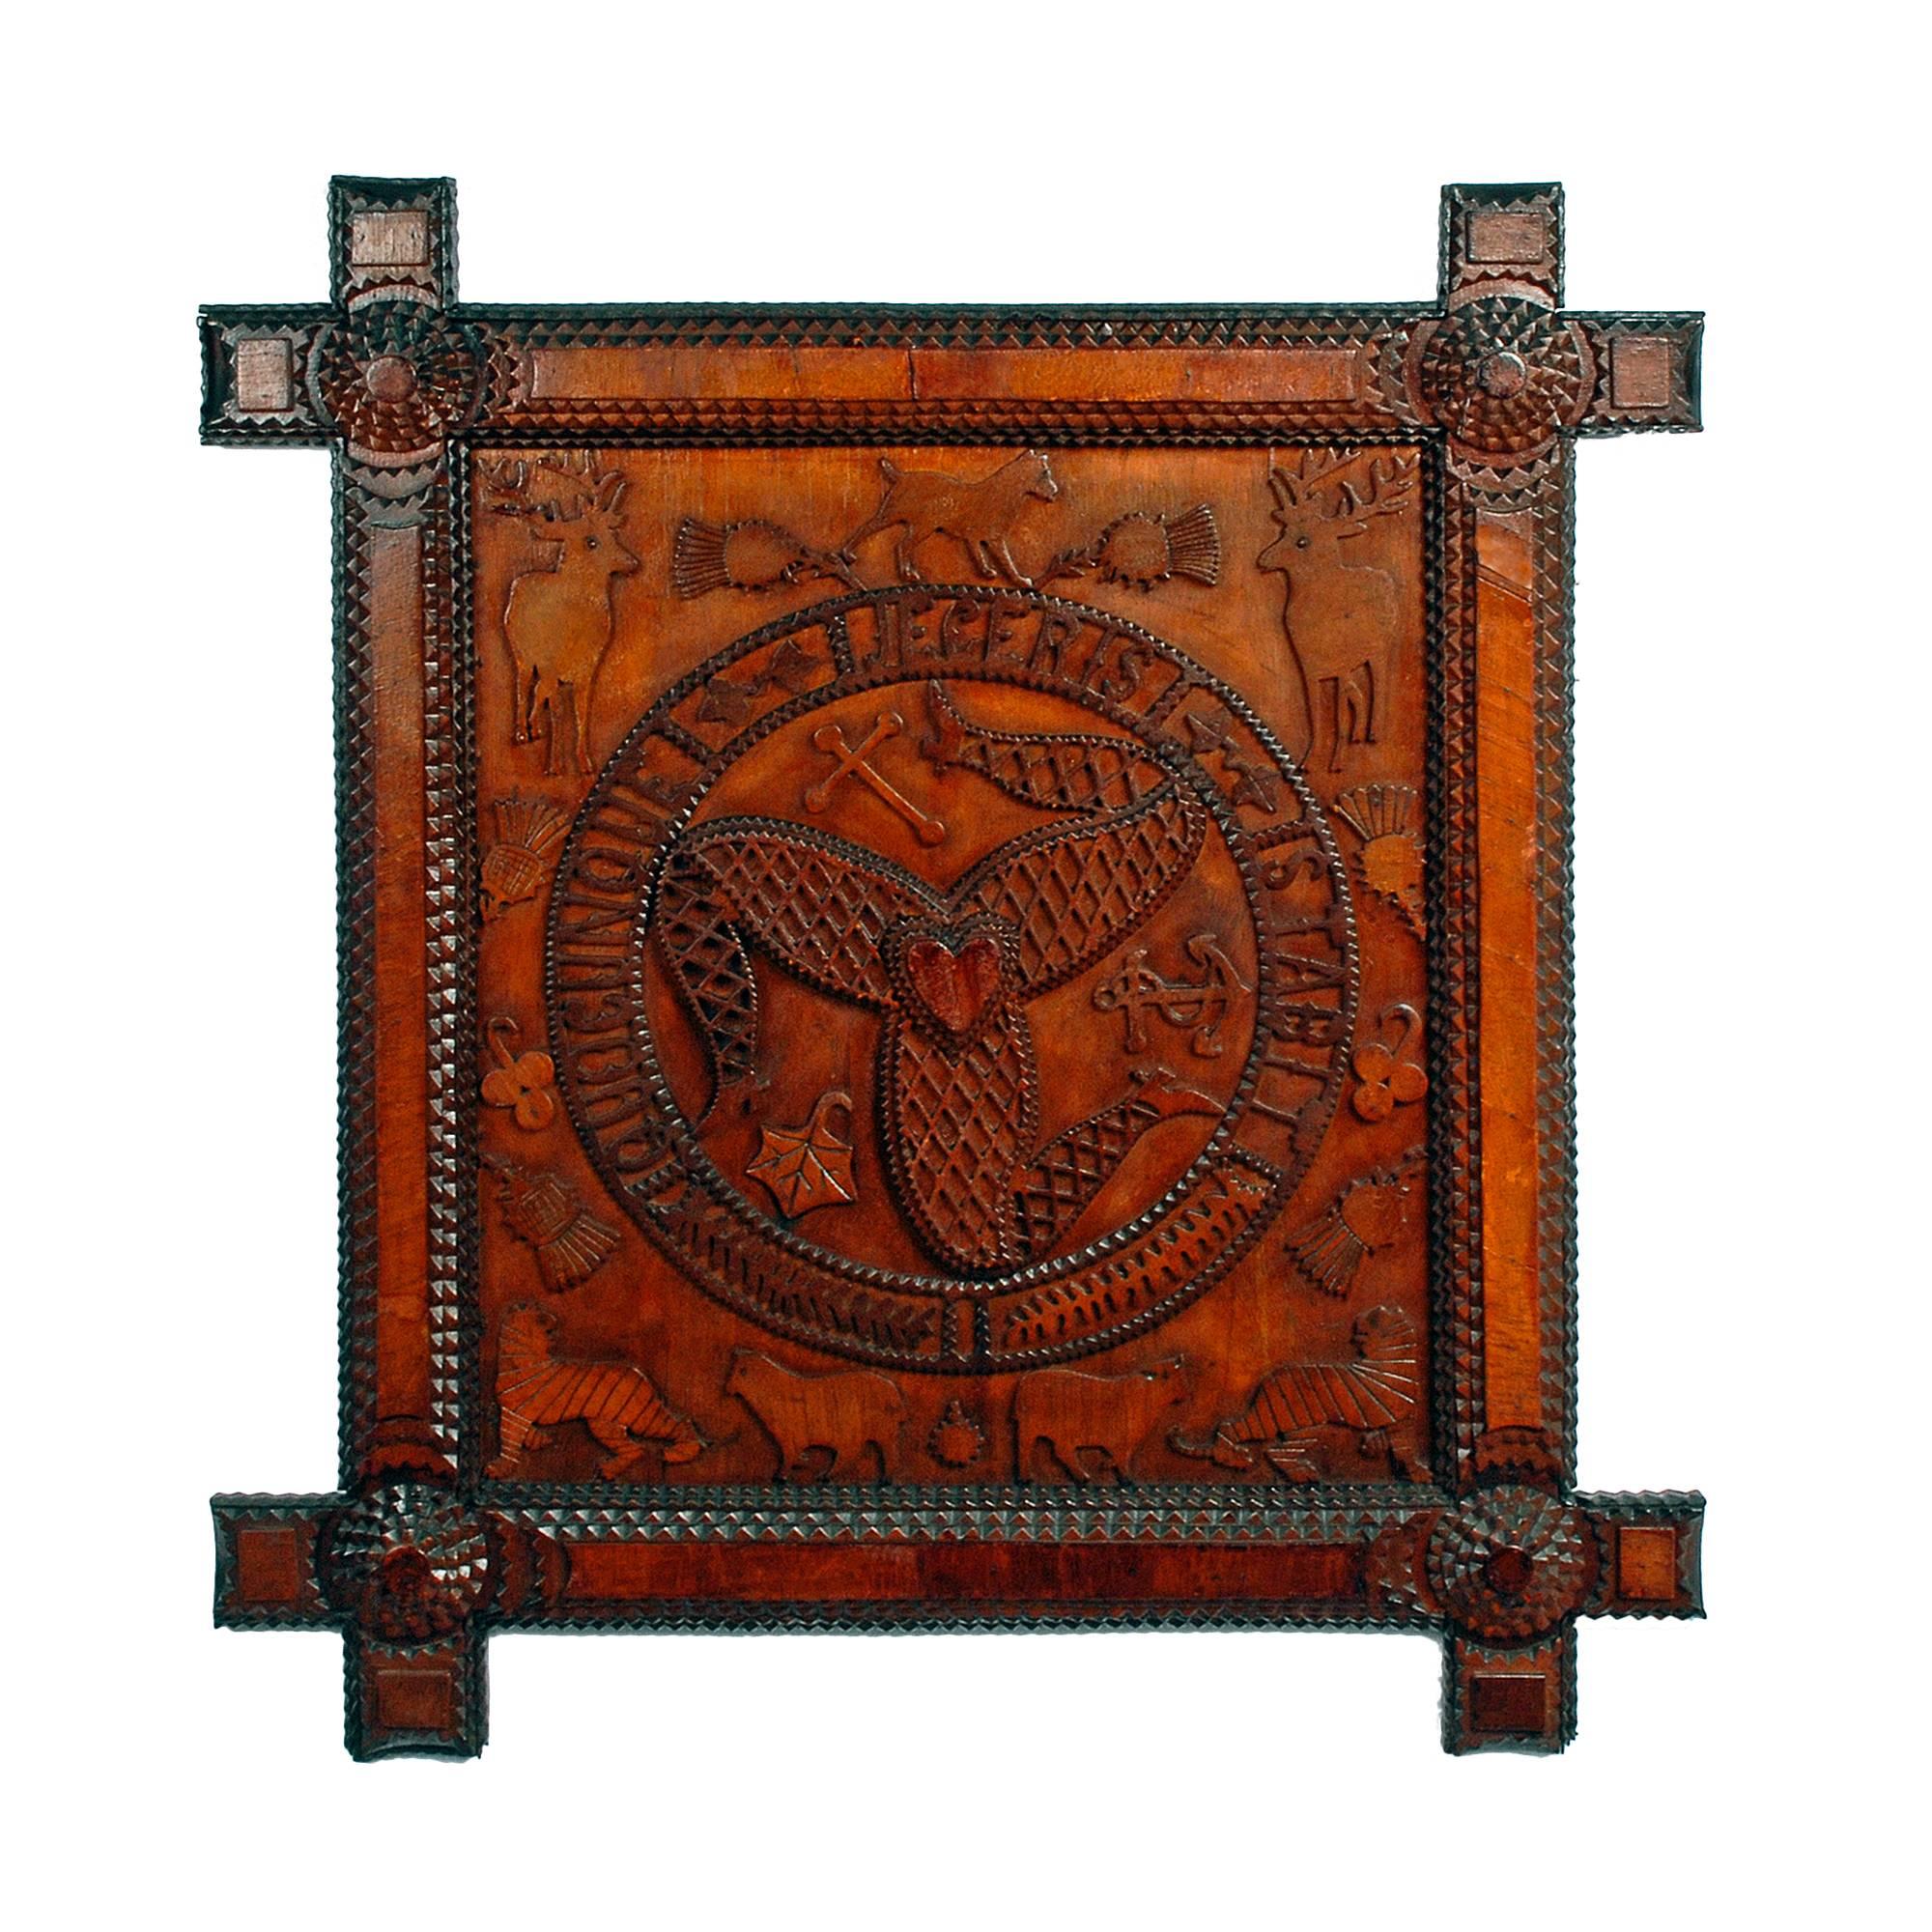 Figural Tramp Art Plaque with the Coat of Arms of the Isle of Man For Sale